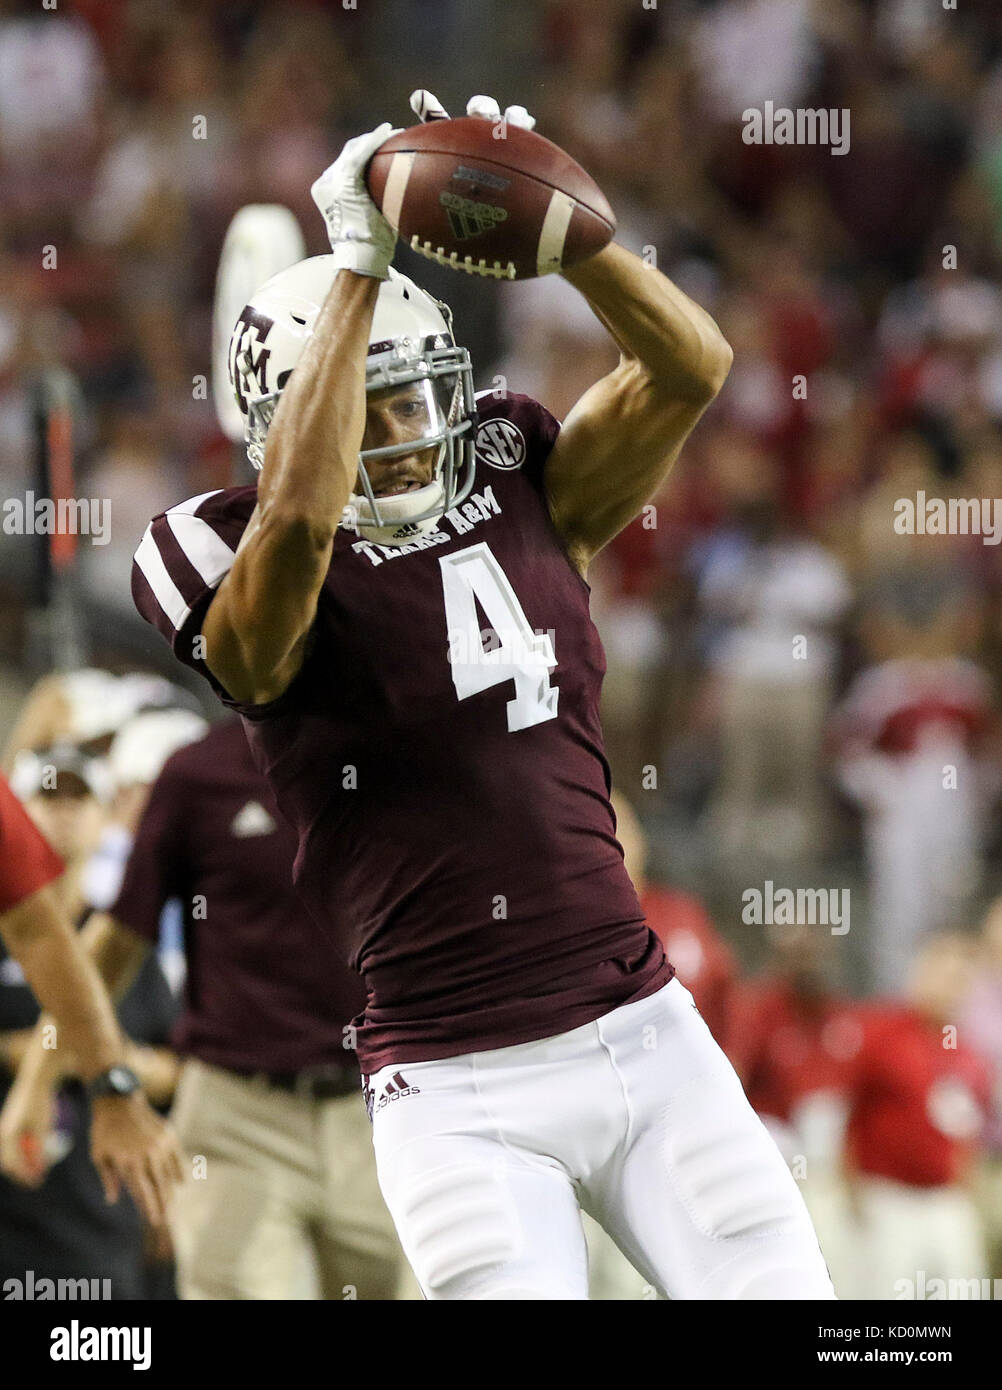 October 6, 2017: Texas A&M Aggies wide receiver Damion Ratley (4) during the NCAA football game between the Alabama Crimson Tide and the Texas A&M Aggies at Kyle Field in College Station, TX; John Glaser/CSM. Stock Photo